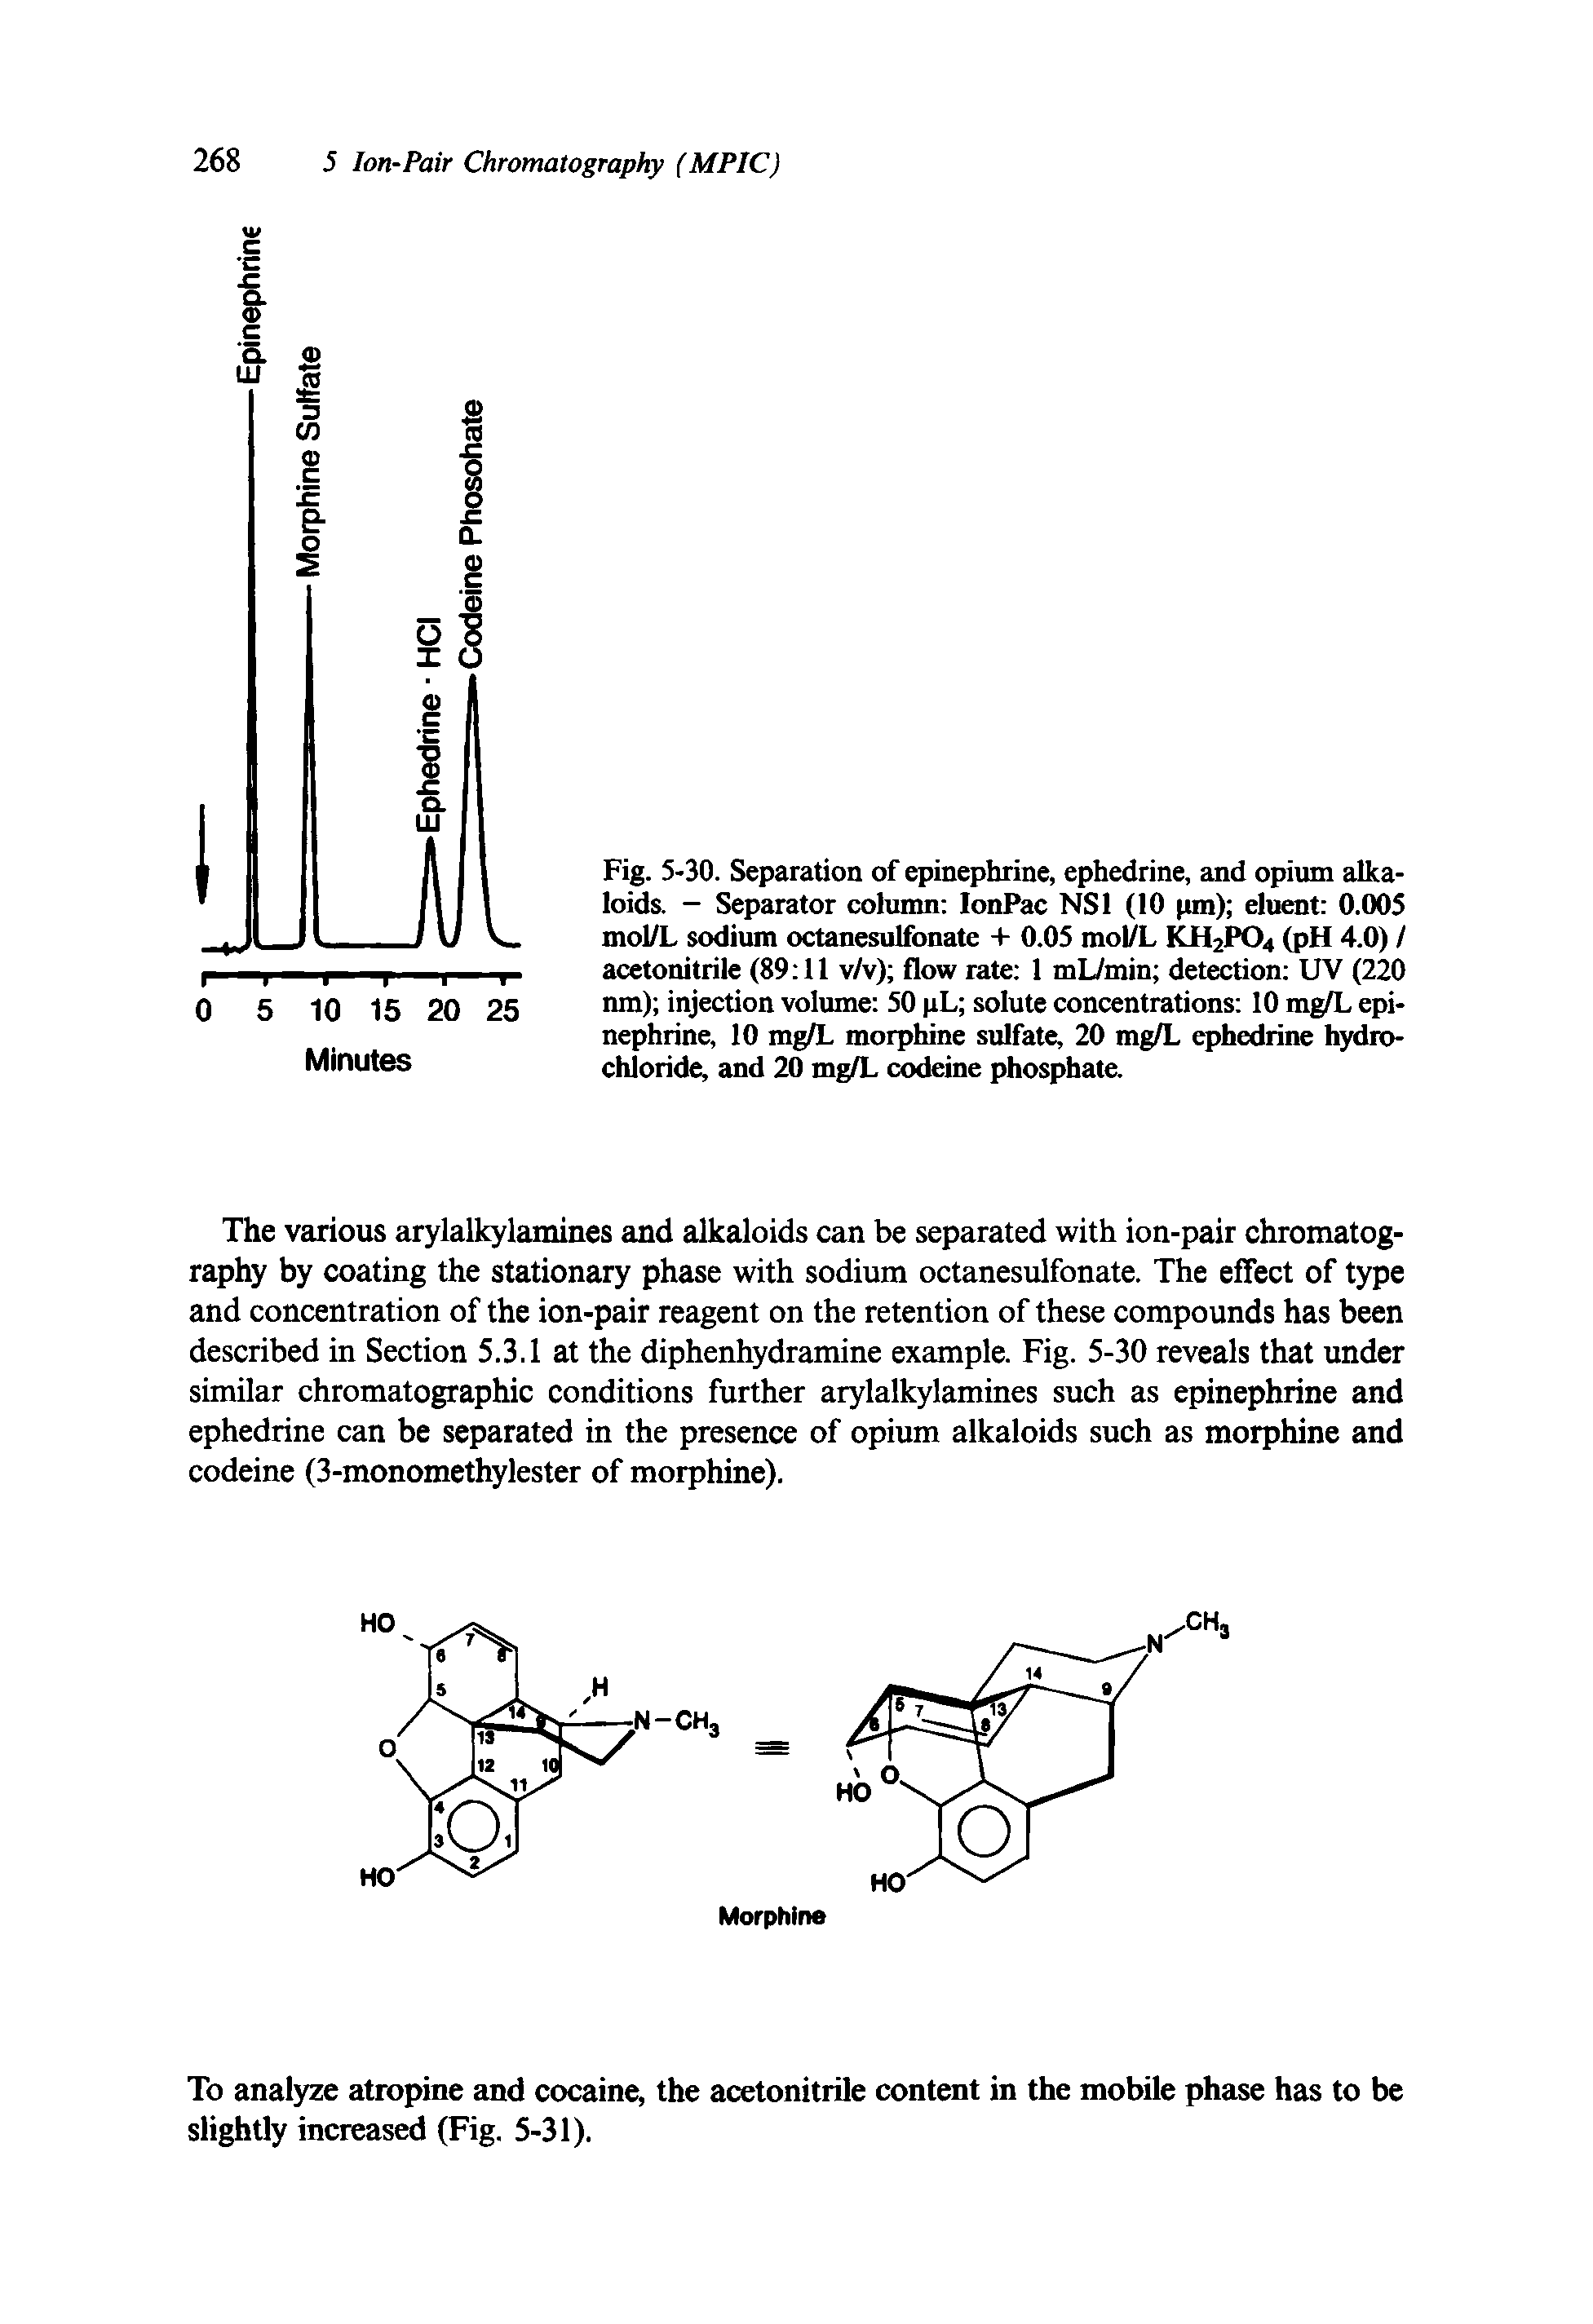 Fig. 5-30. Separation of epinephrine, ephedrine, and opium alkaloids. - Separator column IonPac NS1 (10 pm) eluent 0.005 mol/L sodium octanesulfonate + 0.05 mol/L KH2P04 (pH 4.0) / acetonitrile (89 11 v/v) flow rate 1 mL/min detection UV (220 nm) injection volume 50 pL solute concentrations 10 mg/L epinephrine, 10 mg/L morphine sulfate, 20 mg/L ephedrine hydrochloride, and 20 mg/L codeine phosphate.